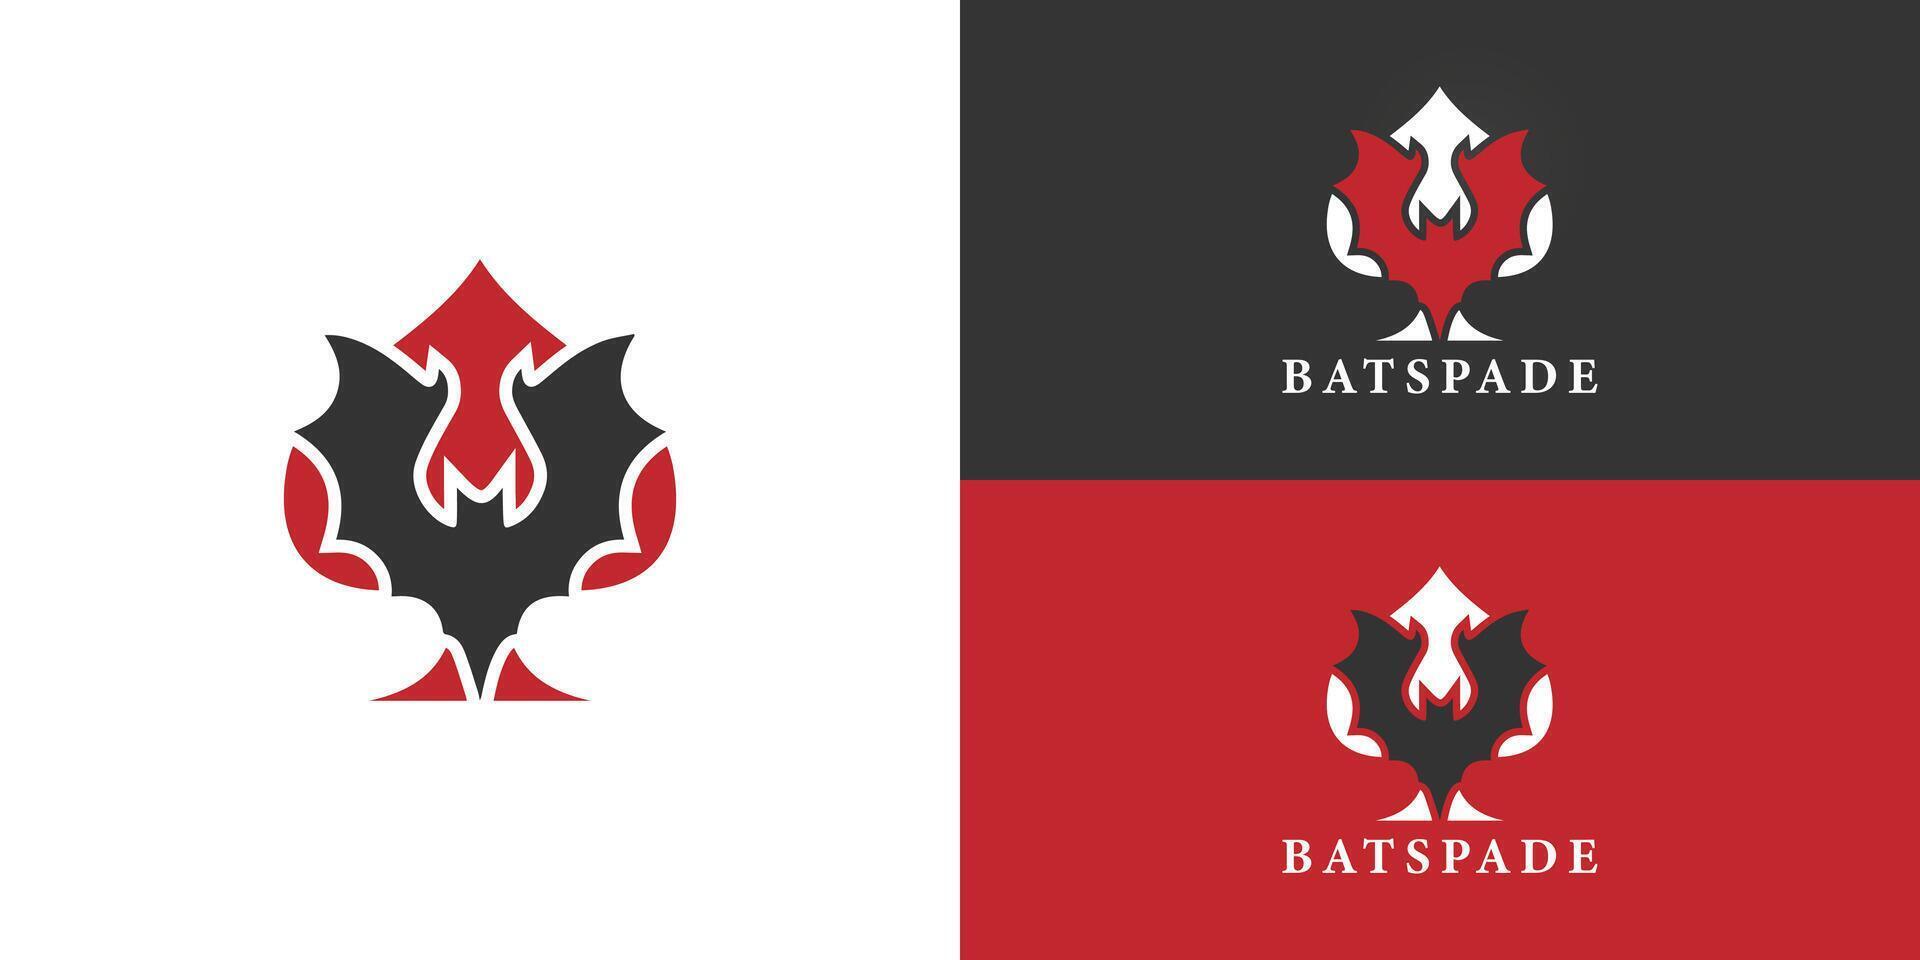 Bat and red spade logo for casino logo design inspiration presented with multiple background colors. The logo is suitable for business and finance logo design inspiration template vector